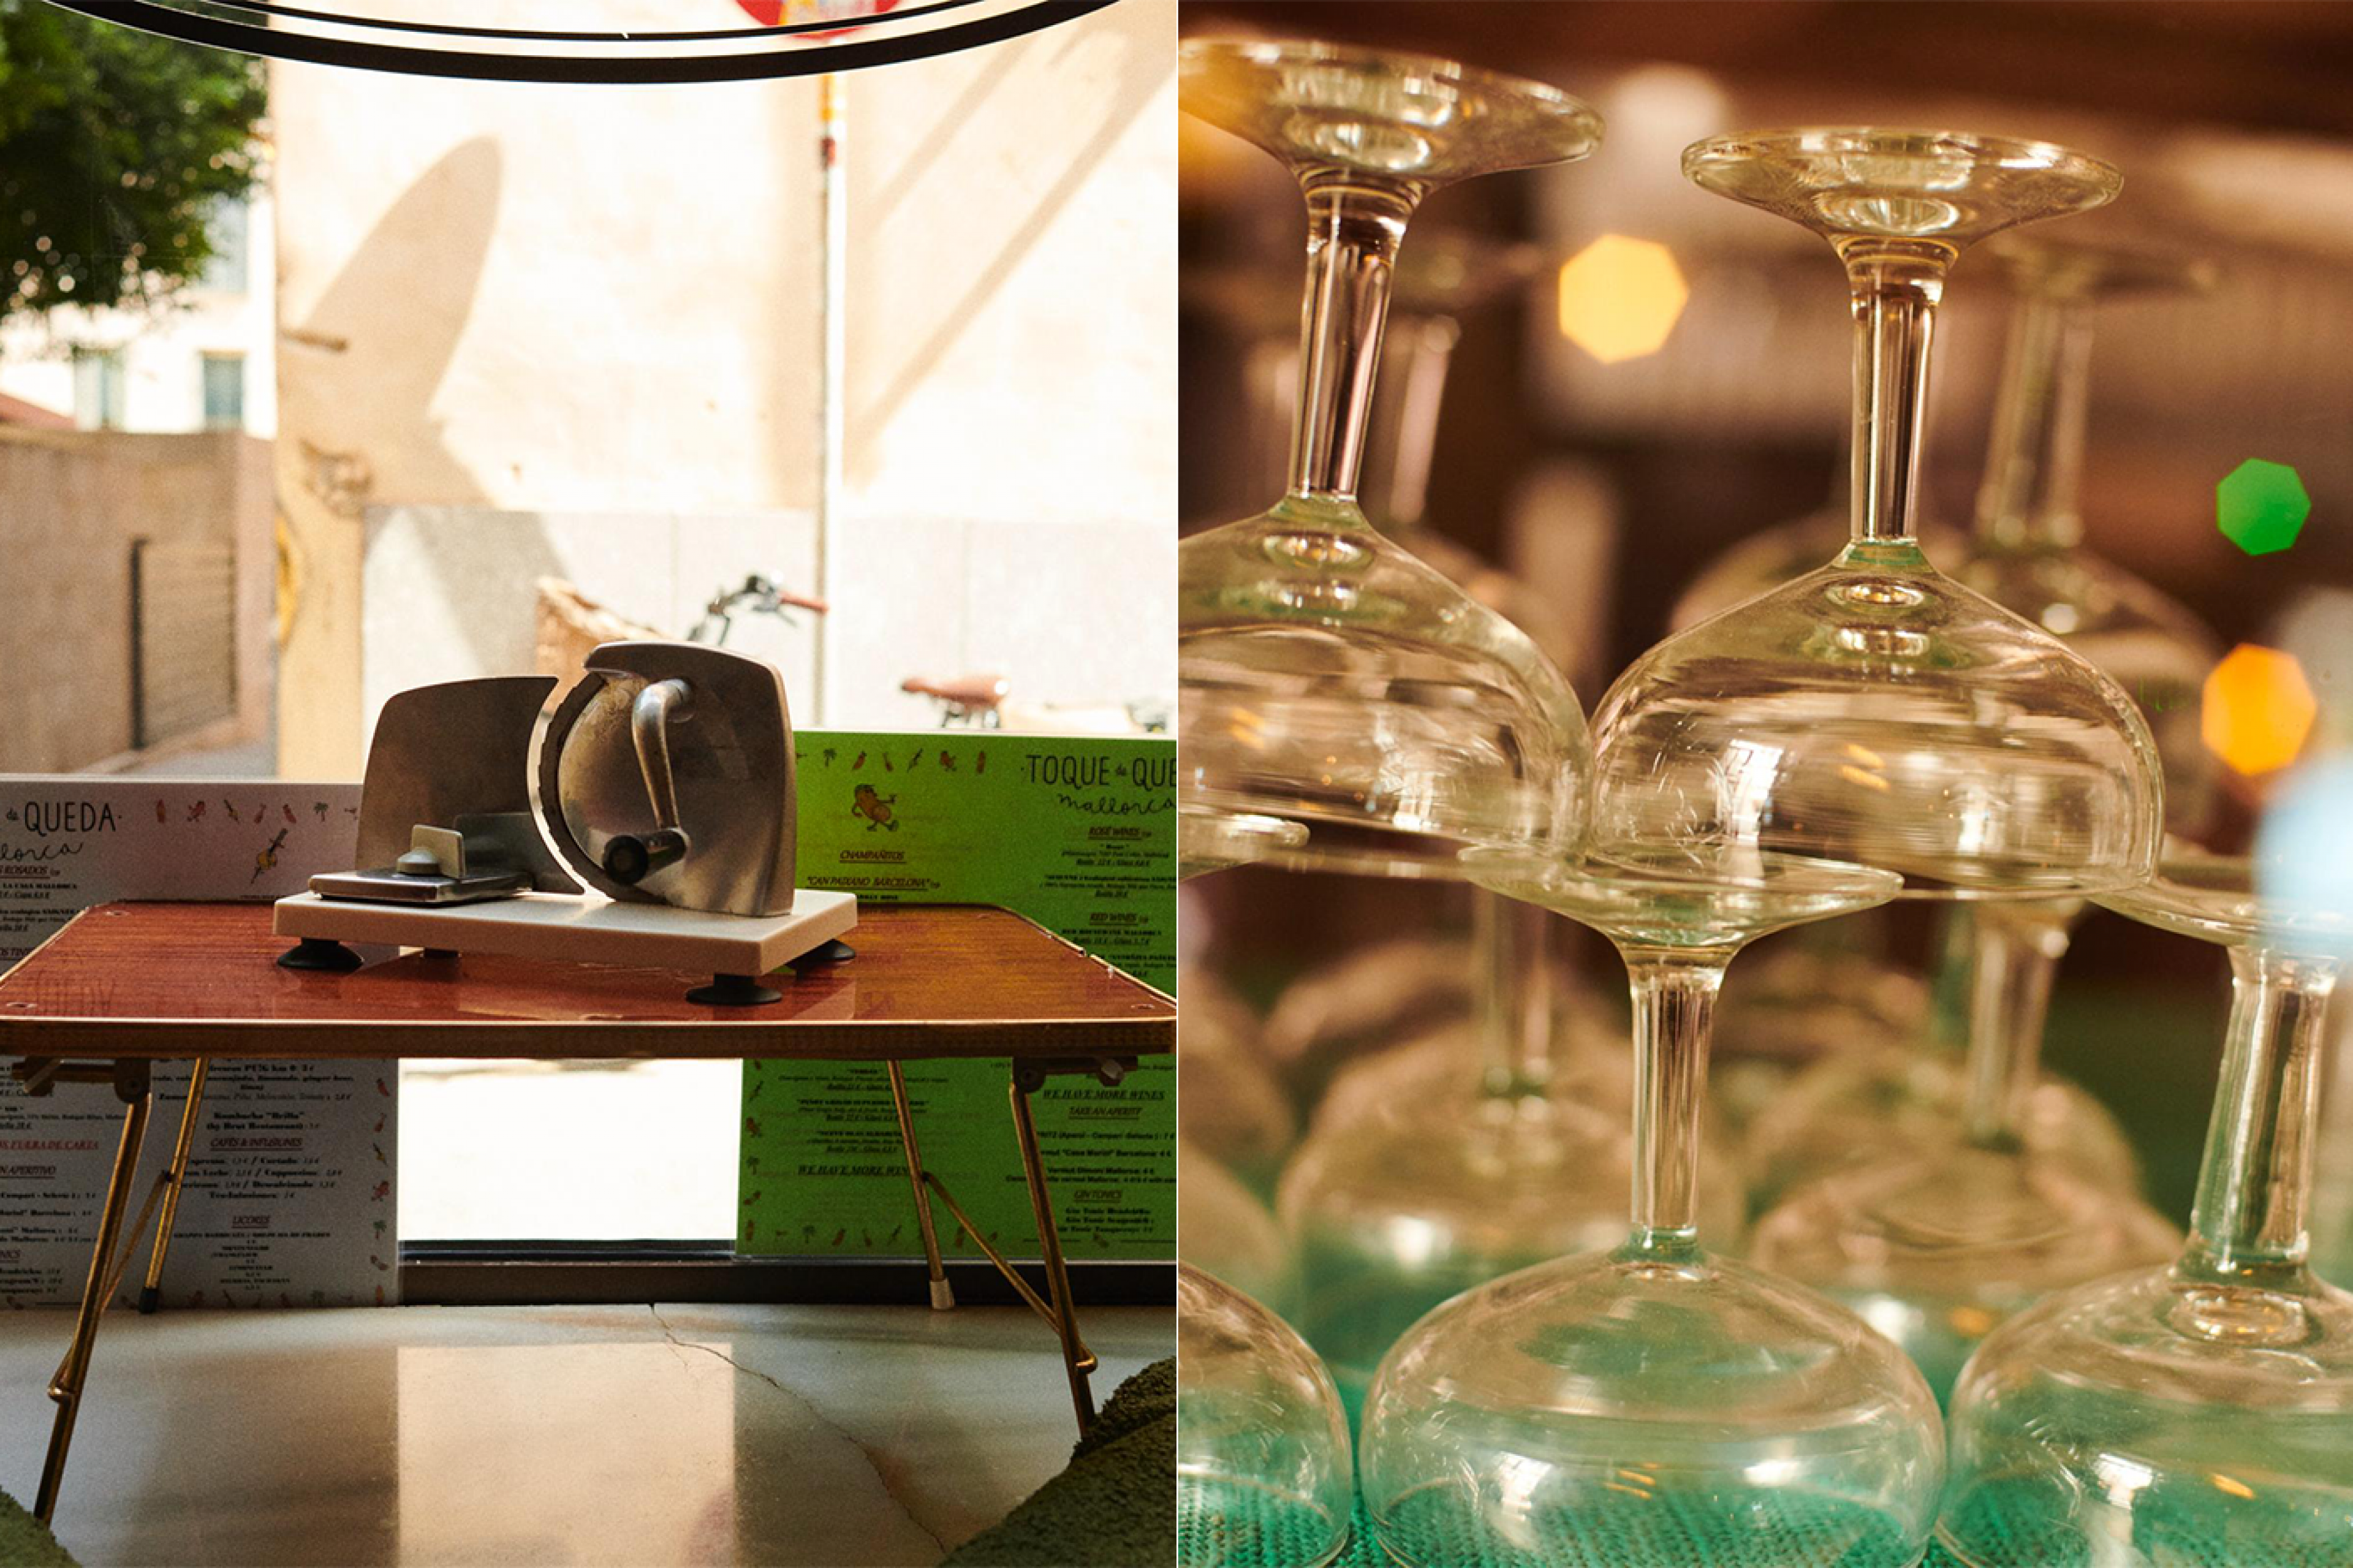 detail shots of restaurant - glasses and a meat slicer